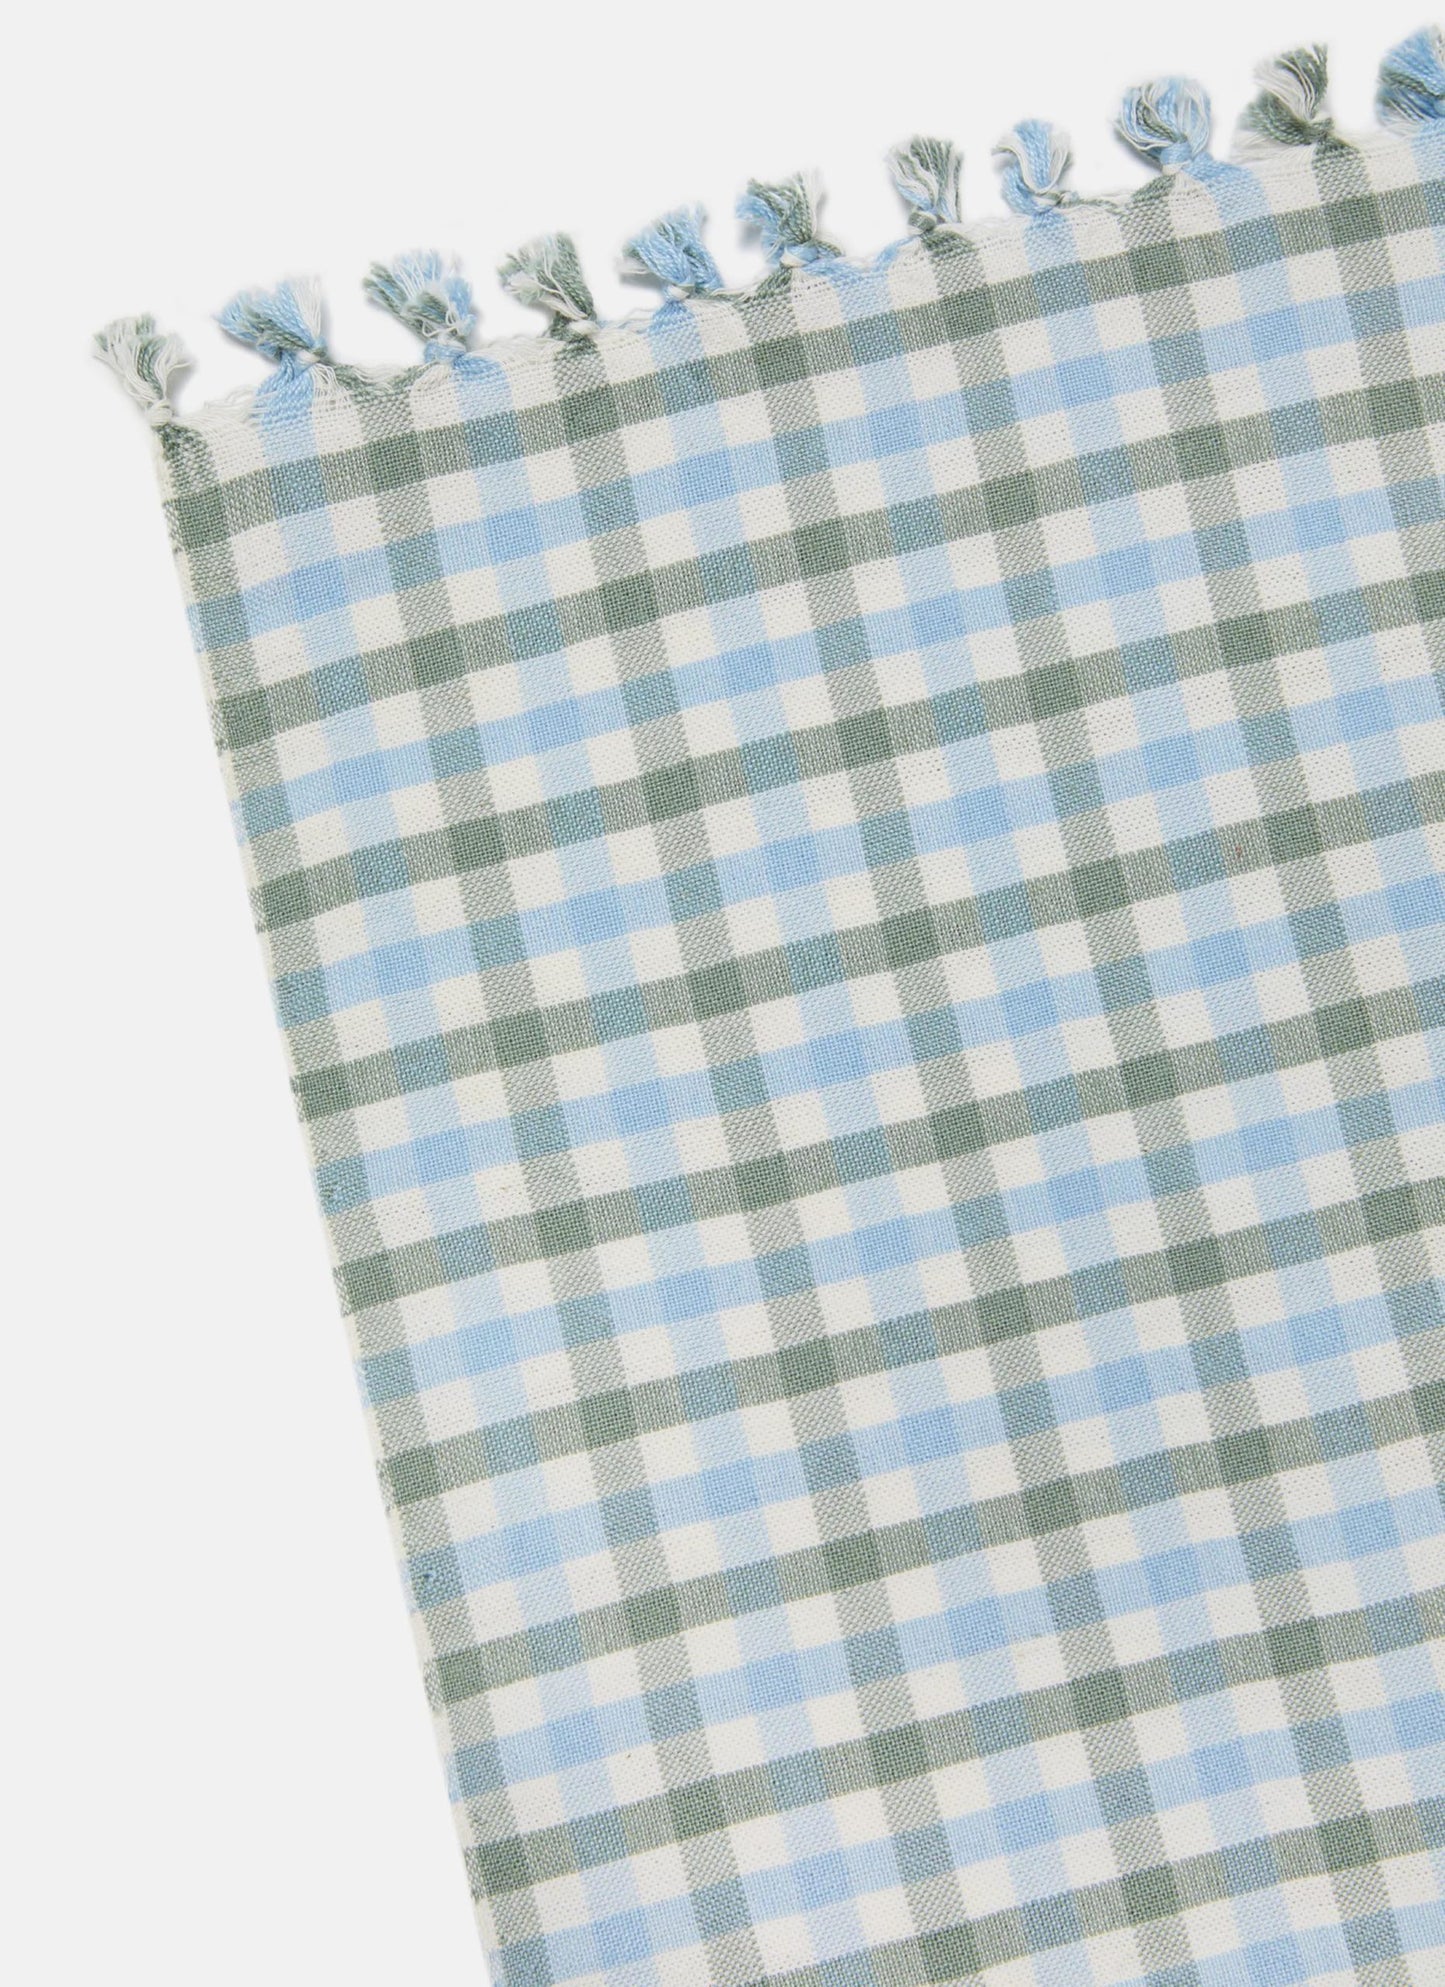 Woven Tablecloth: Mini Gingham - Willow